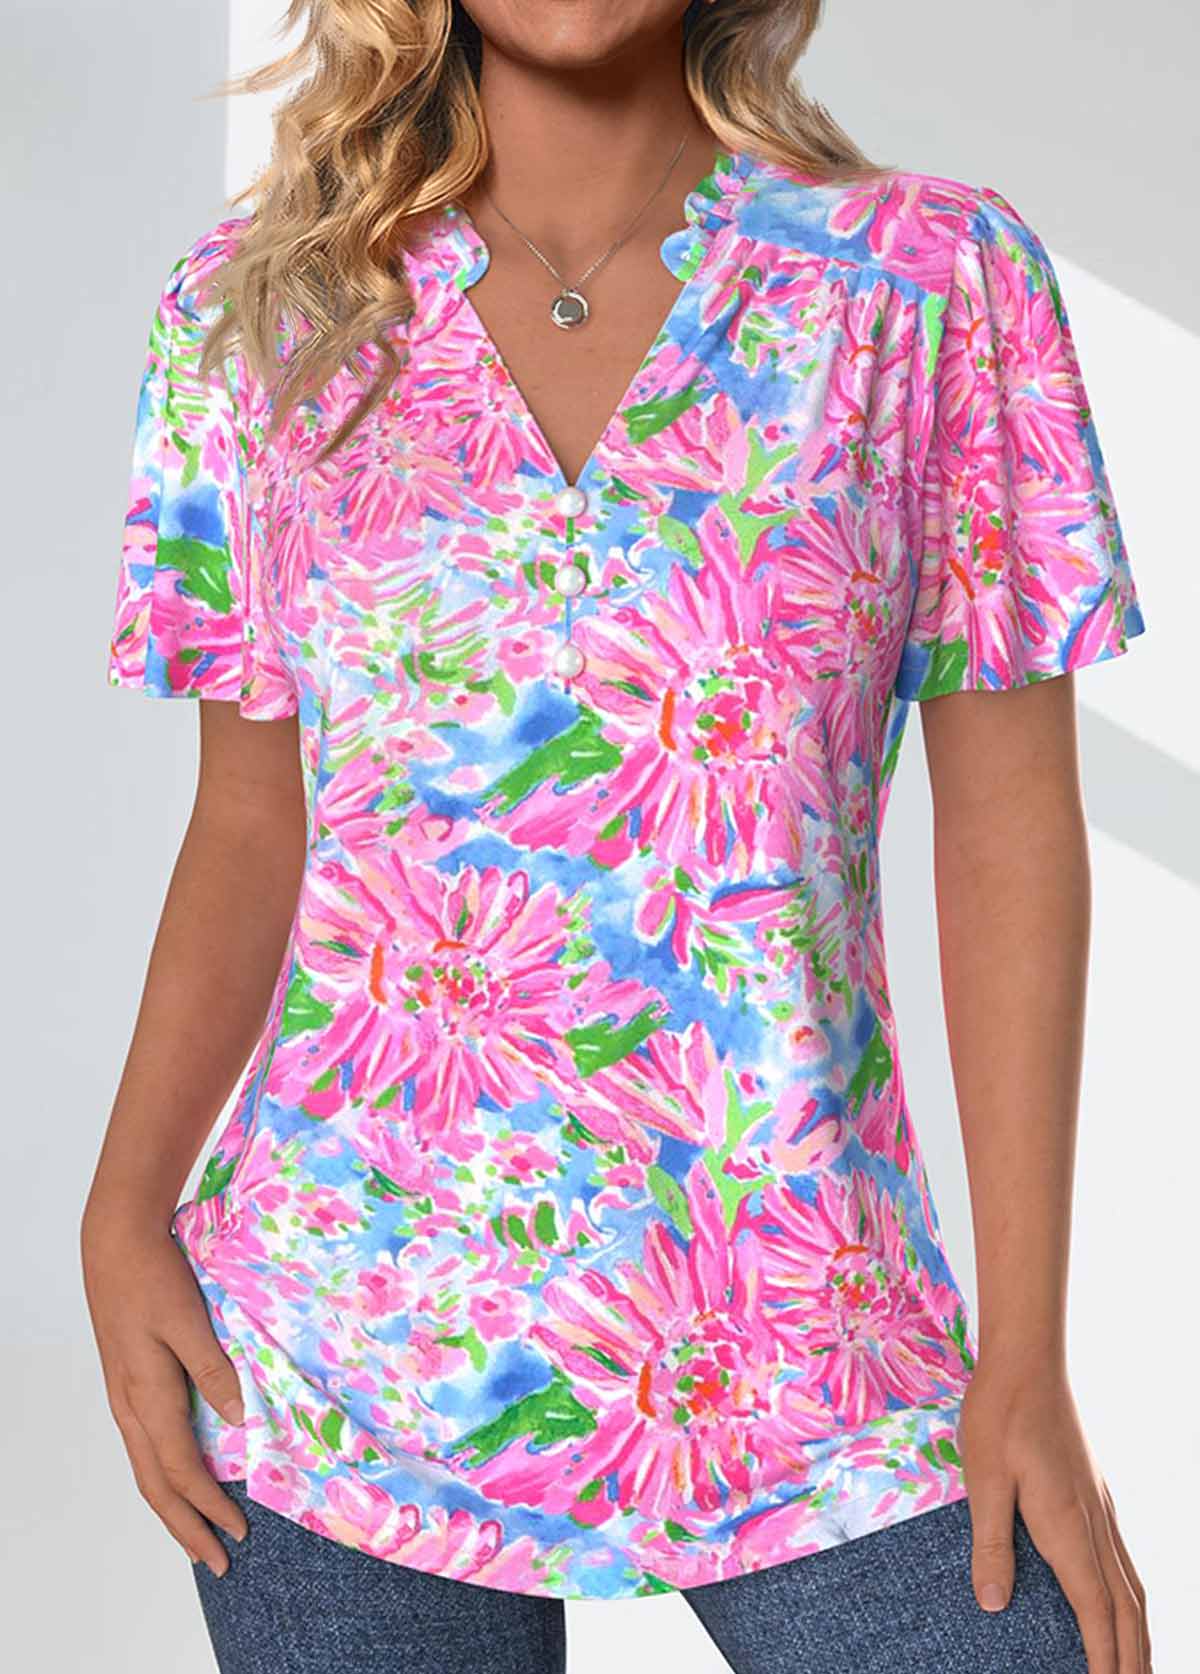 Floral Print Frill Neon Pink Short Sleeve Blouse